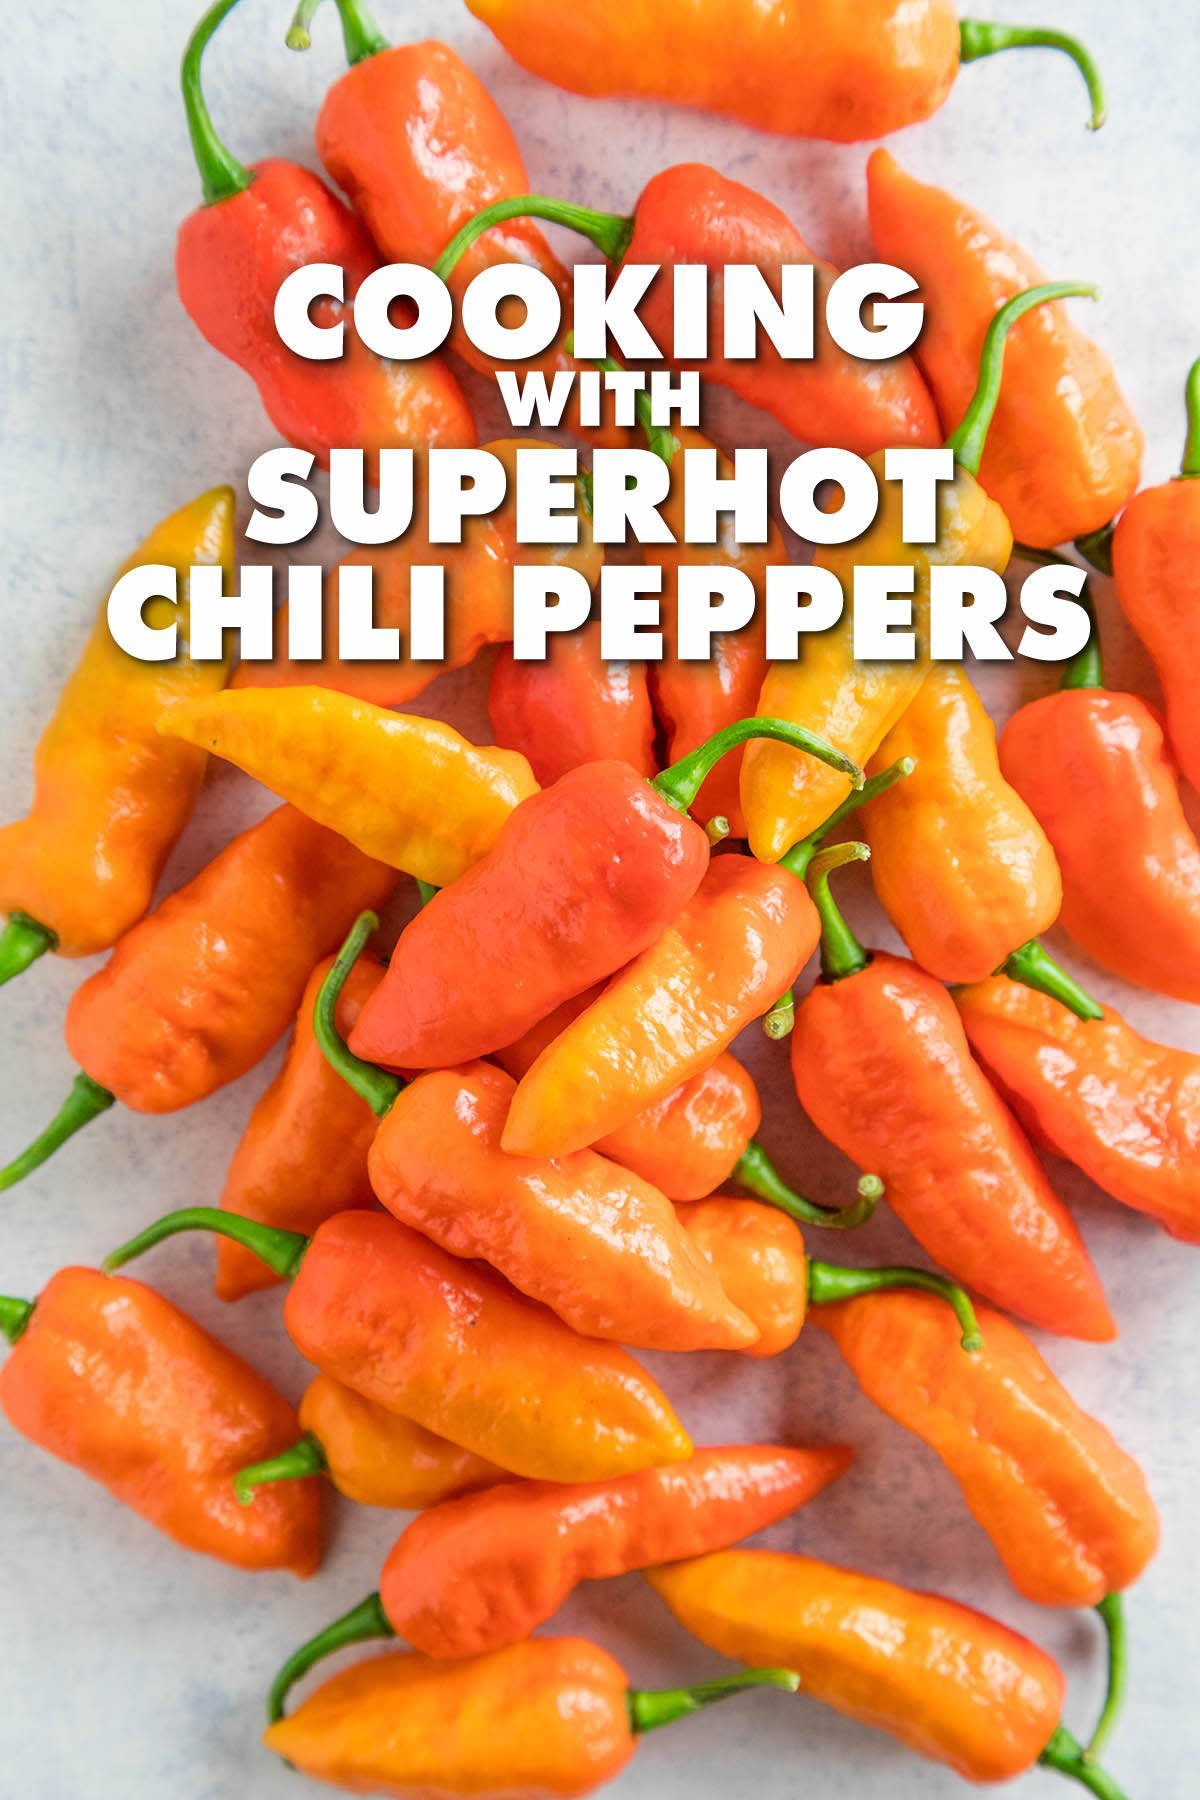 10 Tips for Cooking with Super Hot Chili Peppers